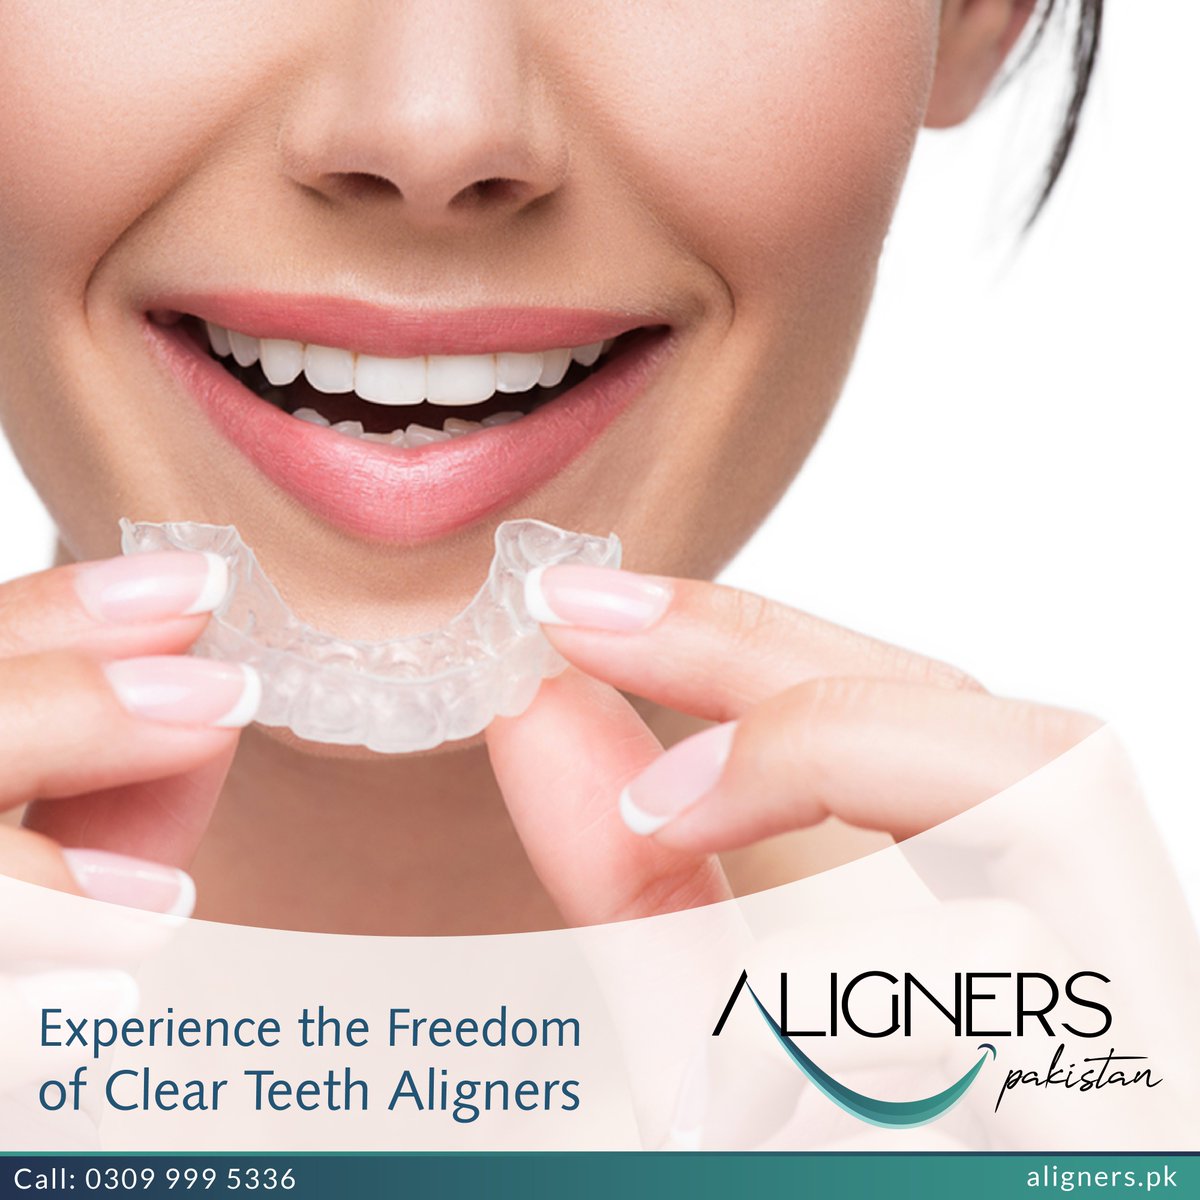 Discover a Confident Smile with Our Invisible Teeth Aligners - Embrace the Freedom to Smile Without Limits!

Book your appointment today!📆📞 0309 999 5336
#InvisibleBraces #ConfidentSmiles #aligners #clearaligners #AlignersPakistan #dentalcare  #dentistry #orthodontics #Pakistan